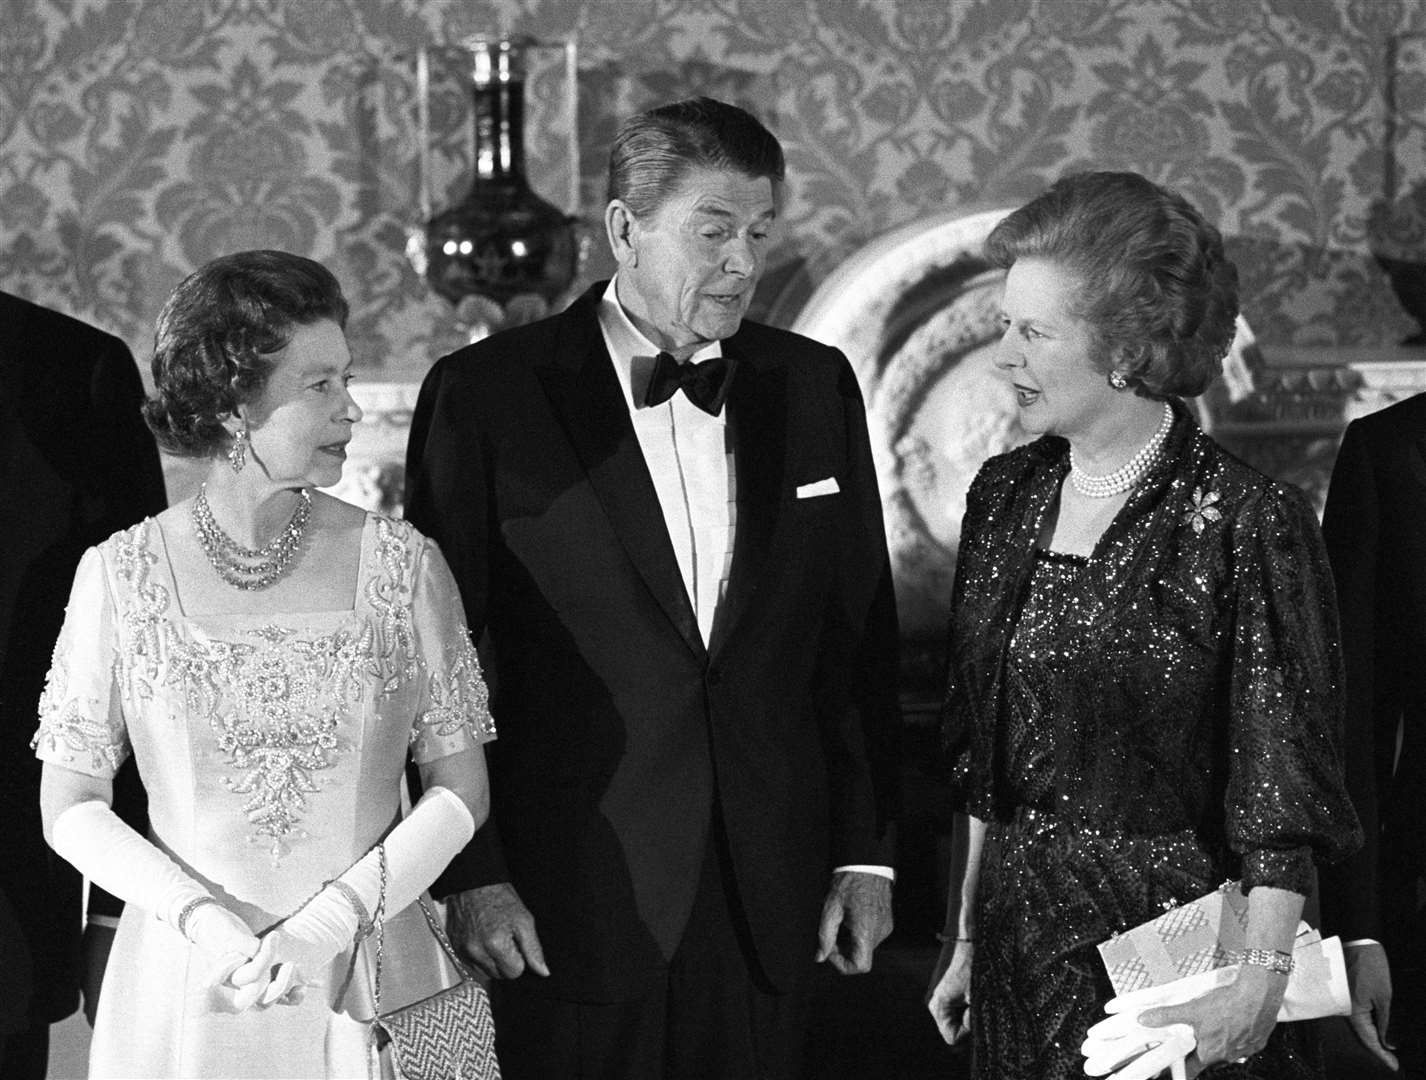 The Queen, US president Ronald Reagan and Margaret Thatcher at a Buckingham Palace banquet in 1984 (PA)